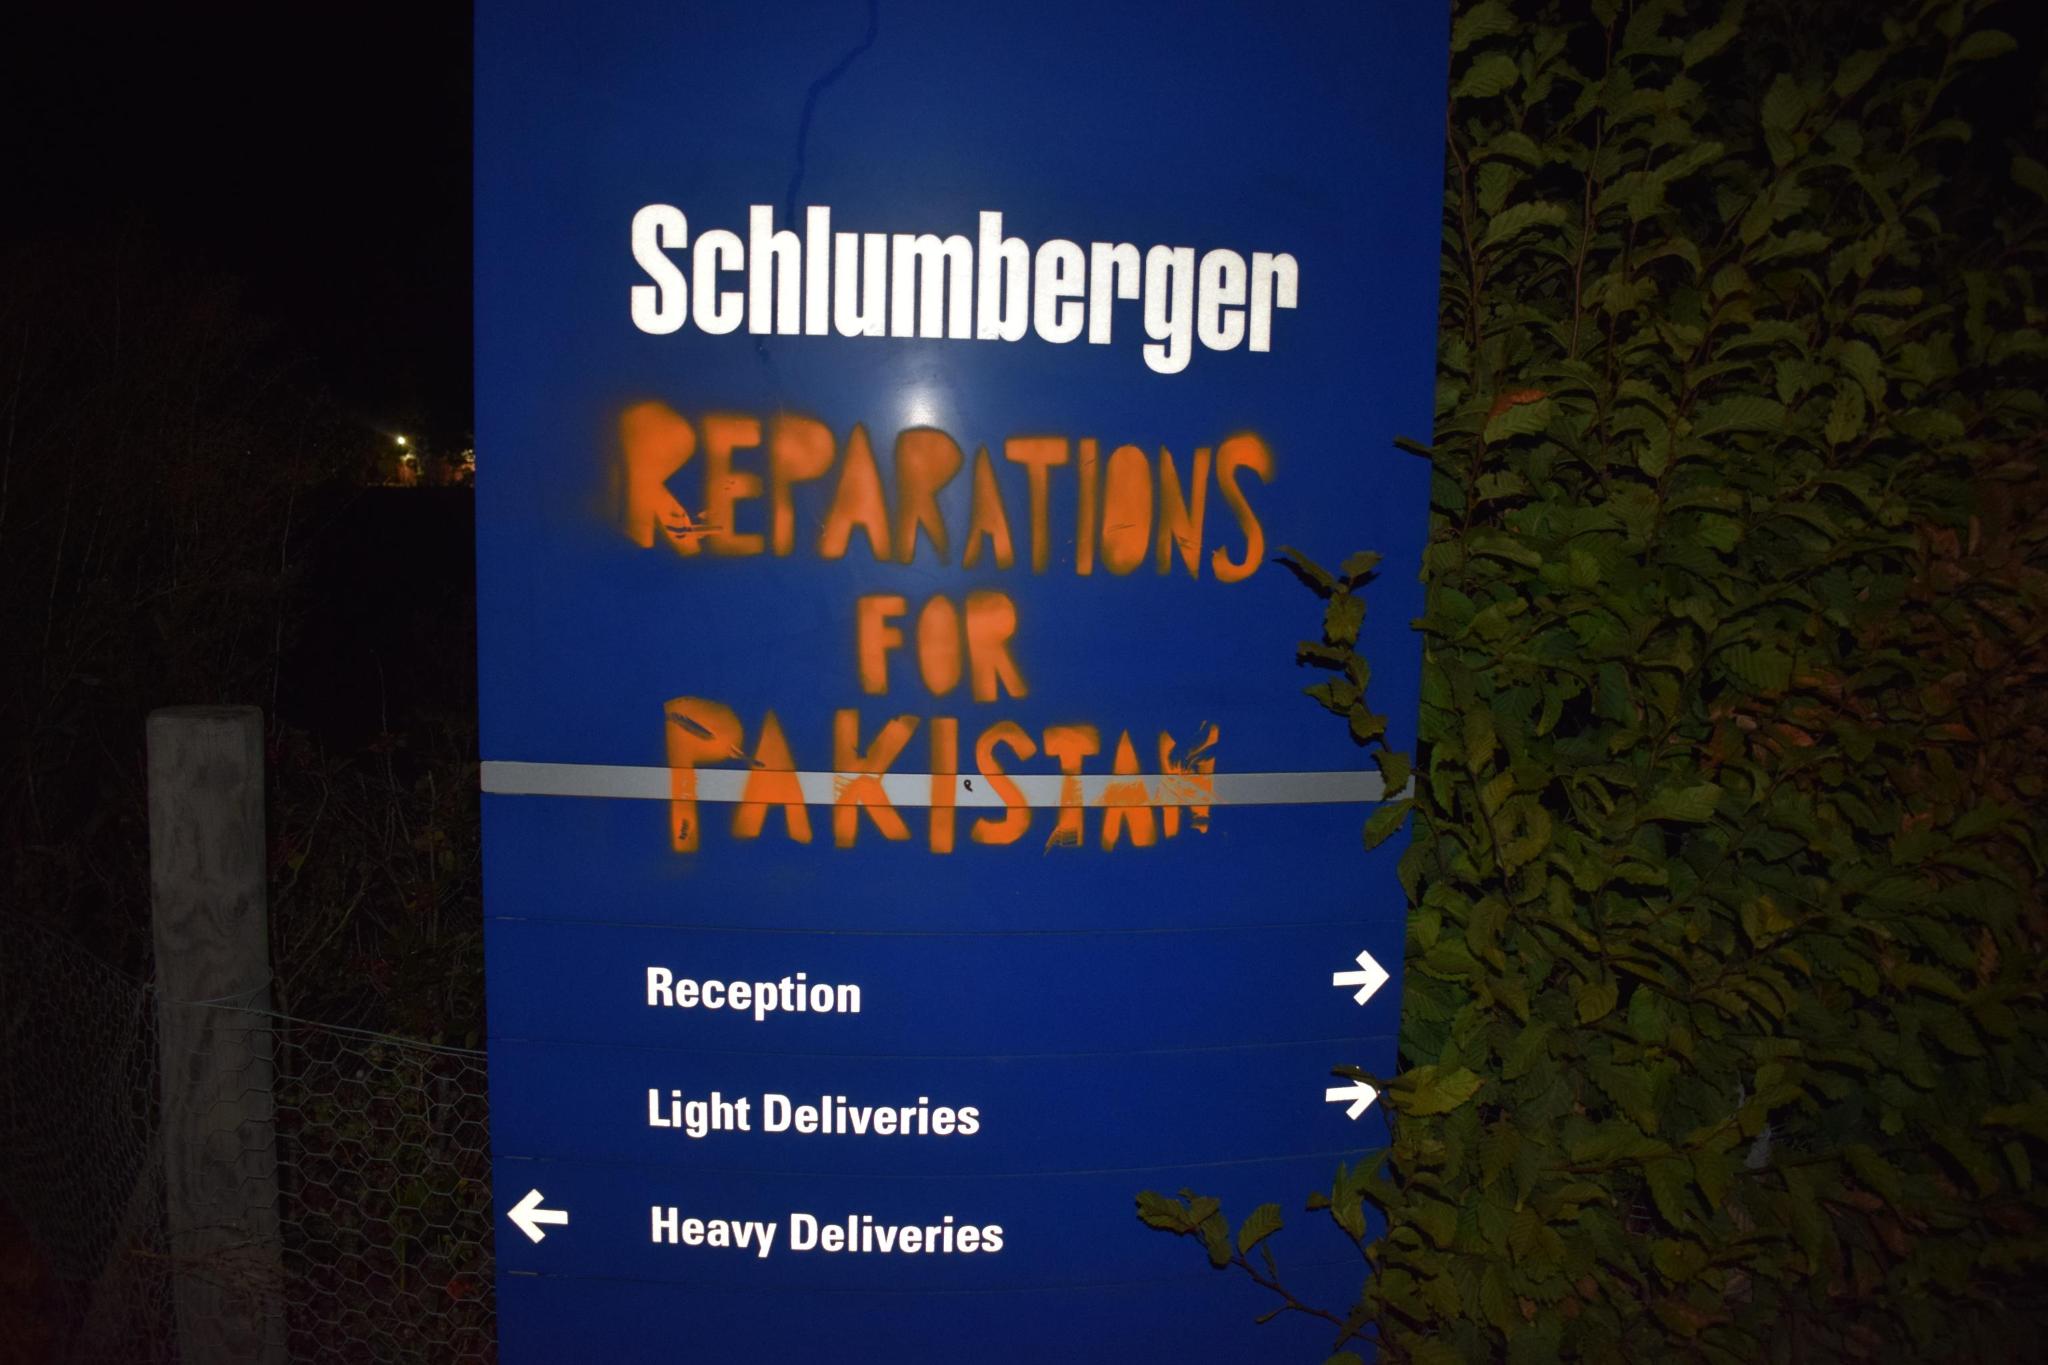 09/09/2022: Sign at Cambridge University’s Schlumberger branch redecorated